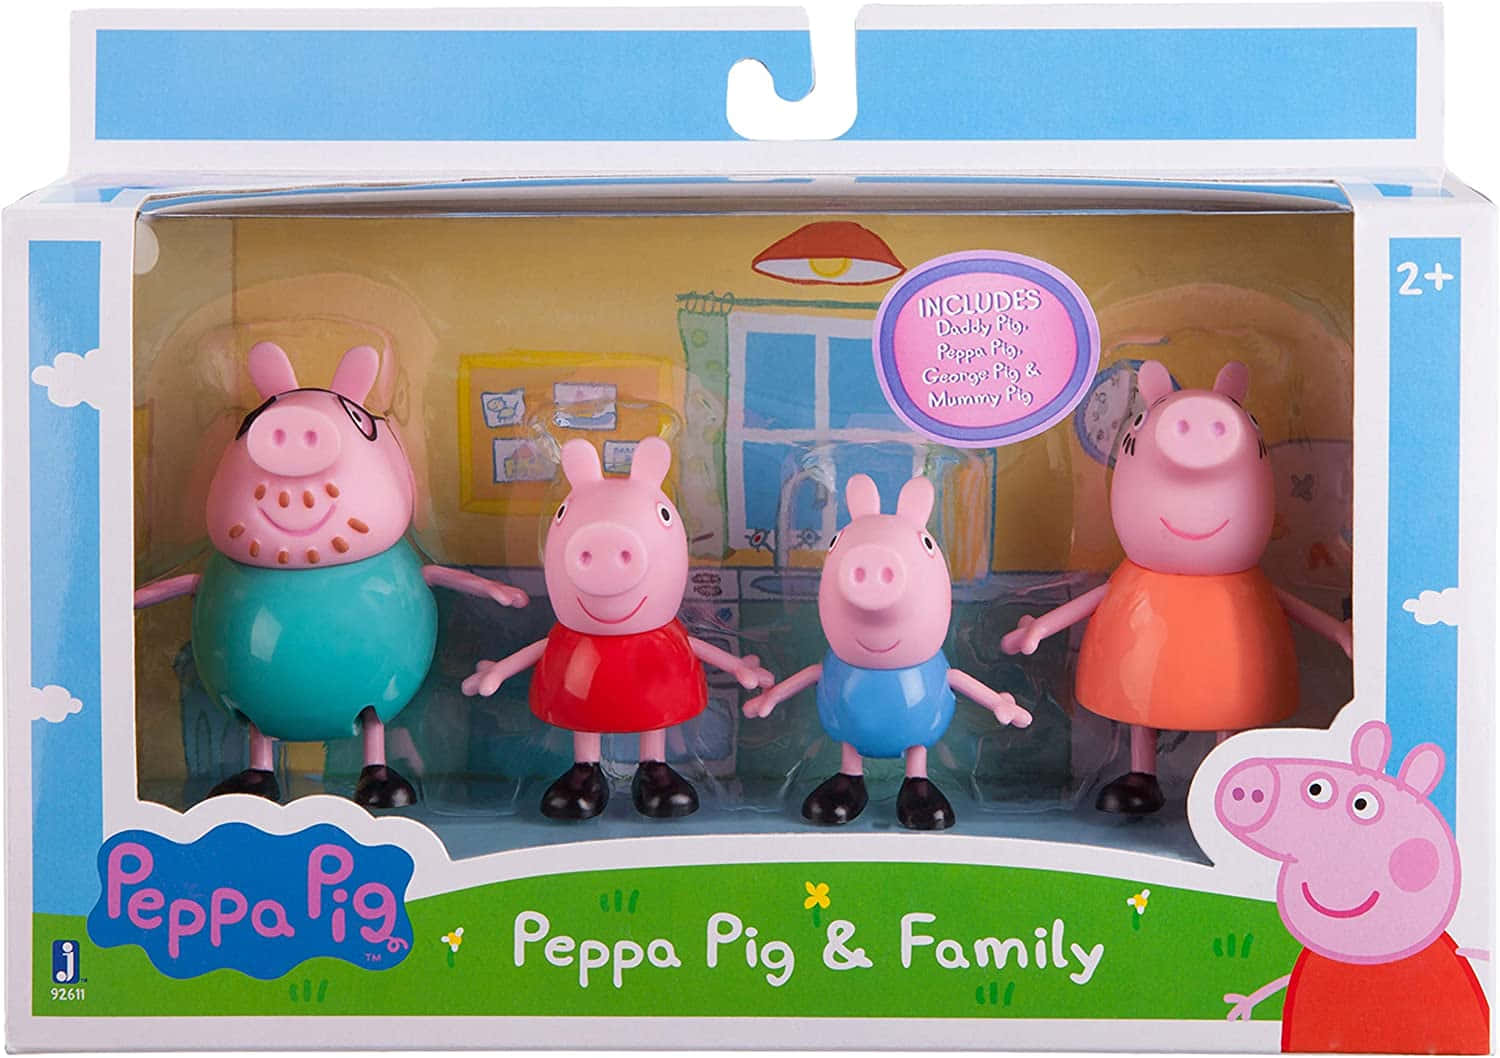 A Fun Day for Peppa and Her Family